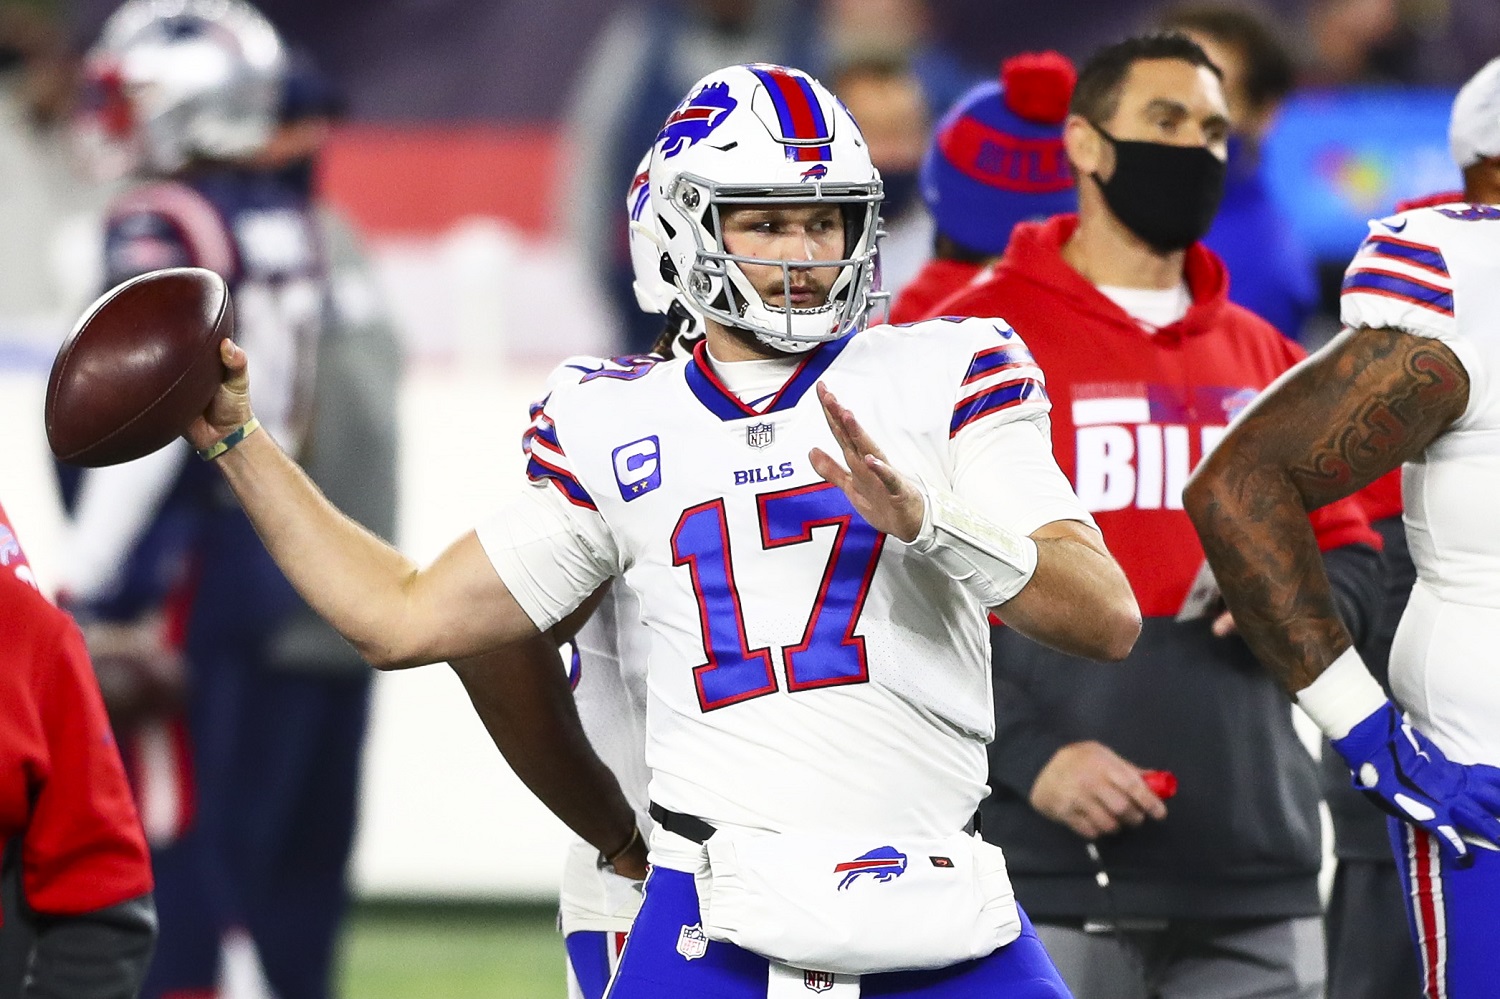 Josh Allen's third NFL season was his best, likely setting the stage for a lucrative contract extension before the start of training camp. | Adam Glanzman/Getty Images